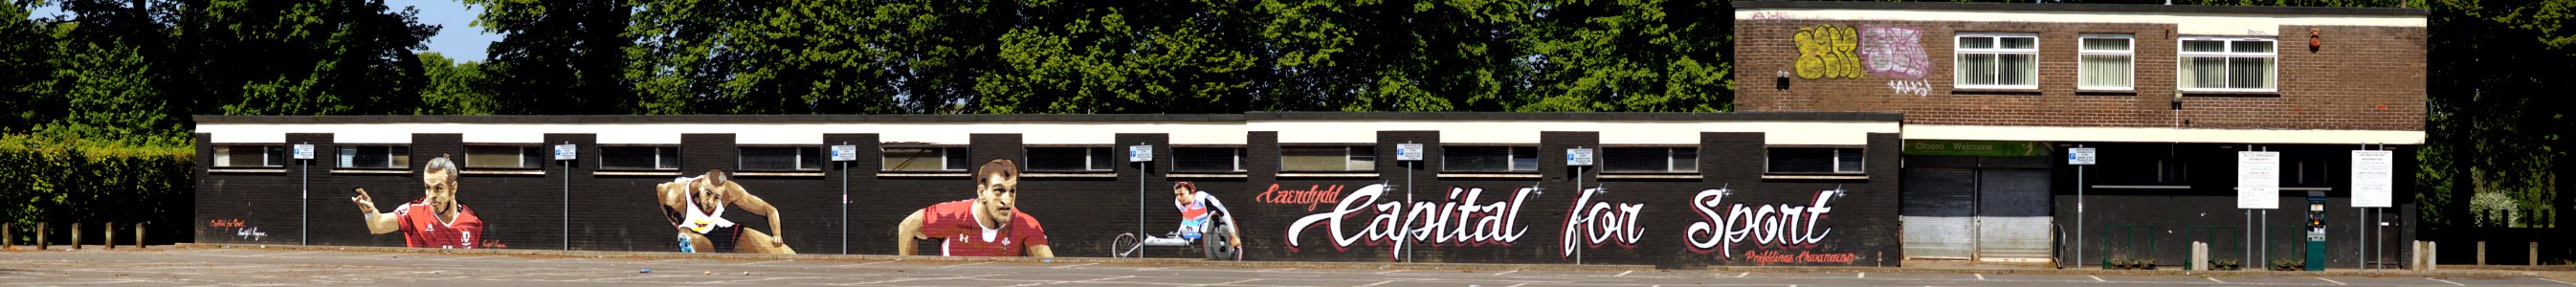 29th Cardiff Scout Group Hall - Sporting Legends Mural (Full front profile)